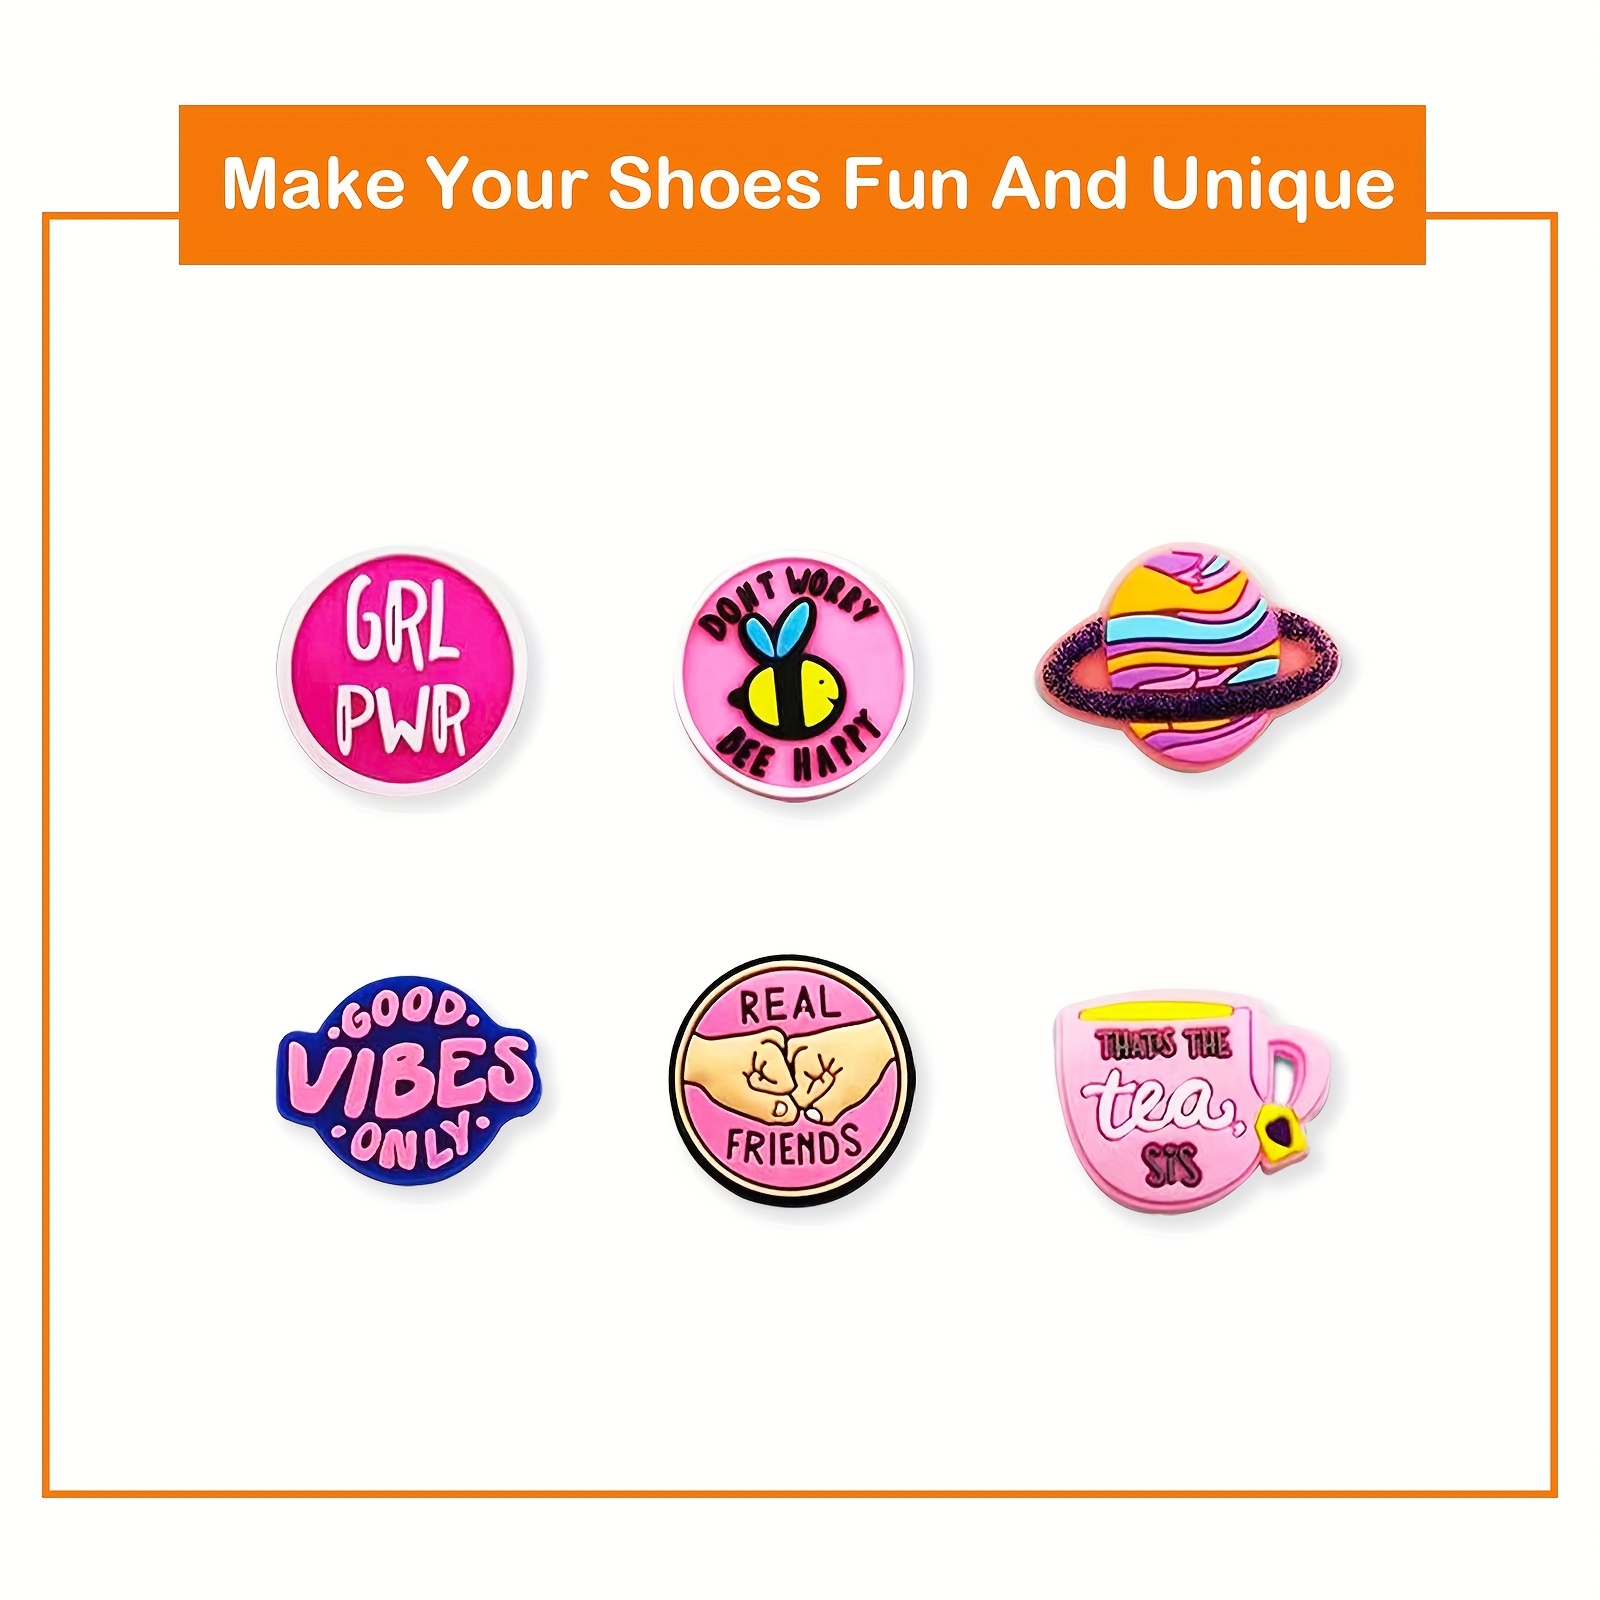 Valentine's Day Croc Charms Pink PVC Shoe Decorations Clogs Wristband  Accessories Women Men Couple Festival Party Gifts